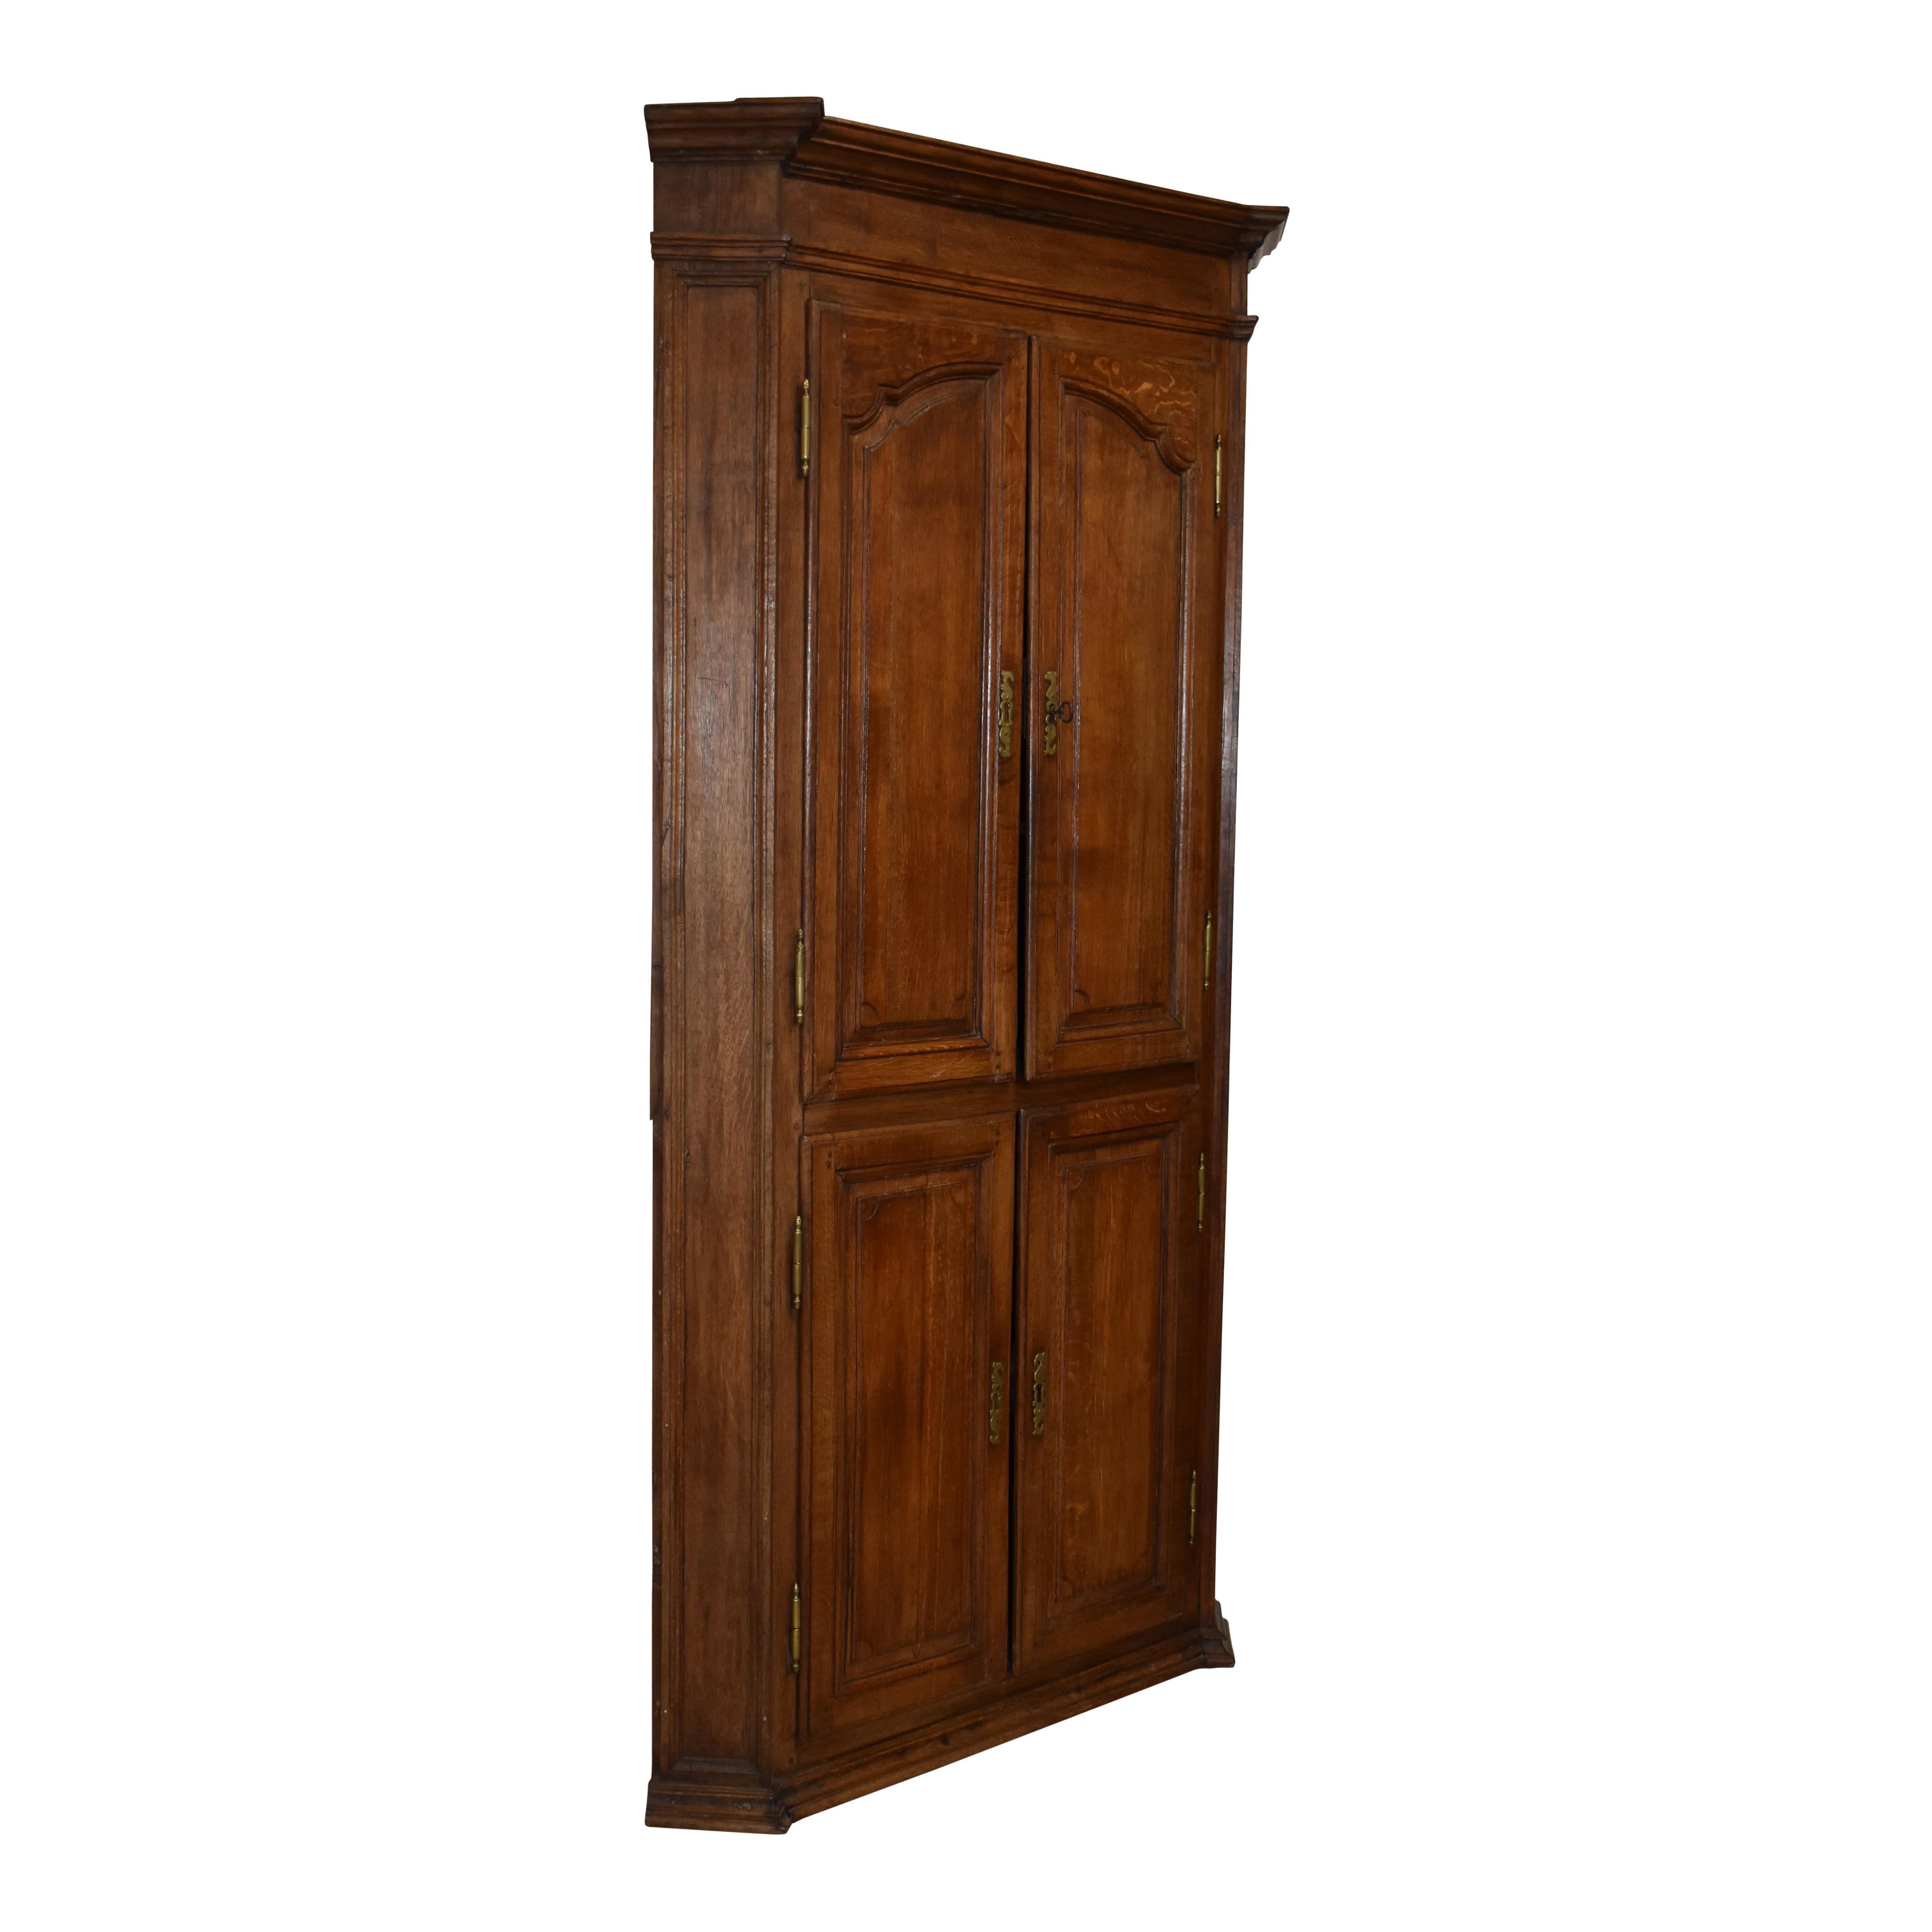 Simple yet stately, this corner cabinet was crafted from solid oak and finished with a medium stain at the beginning of the 20th century. The cabinet's corner design maximizes storage without sacrificing floor space. Although the cabinet appears to